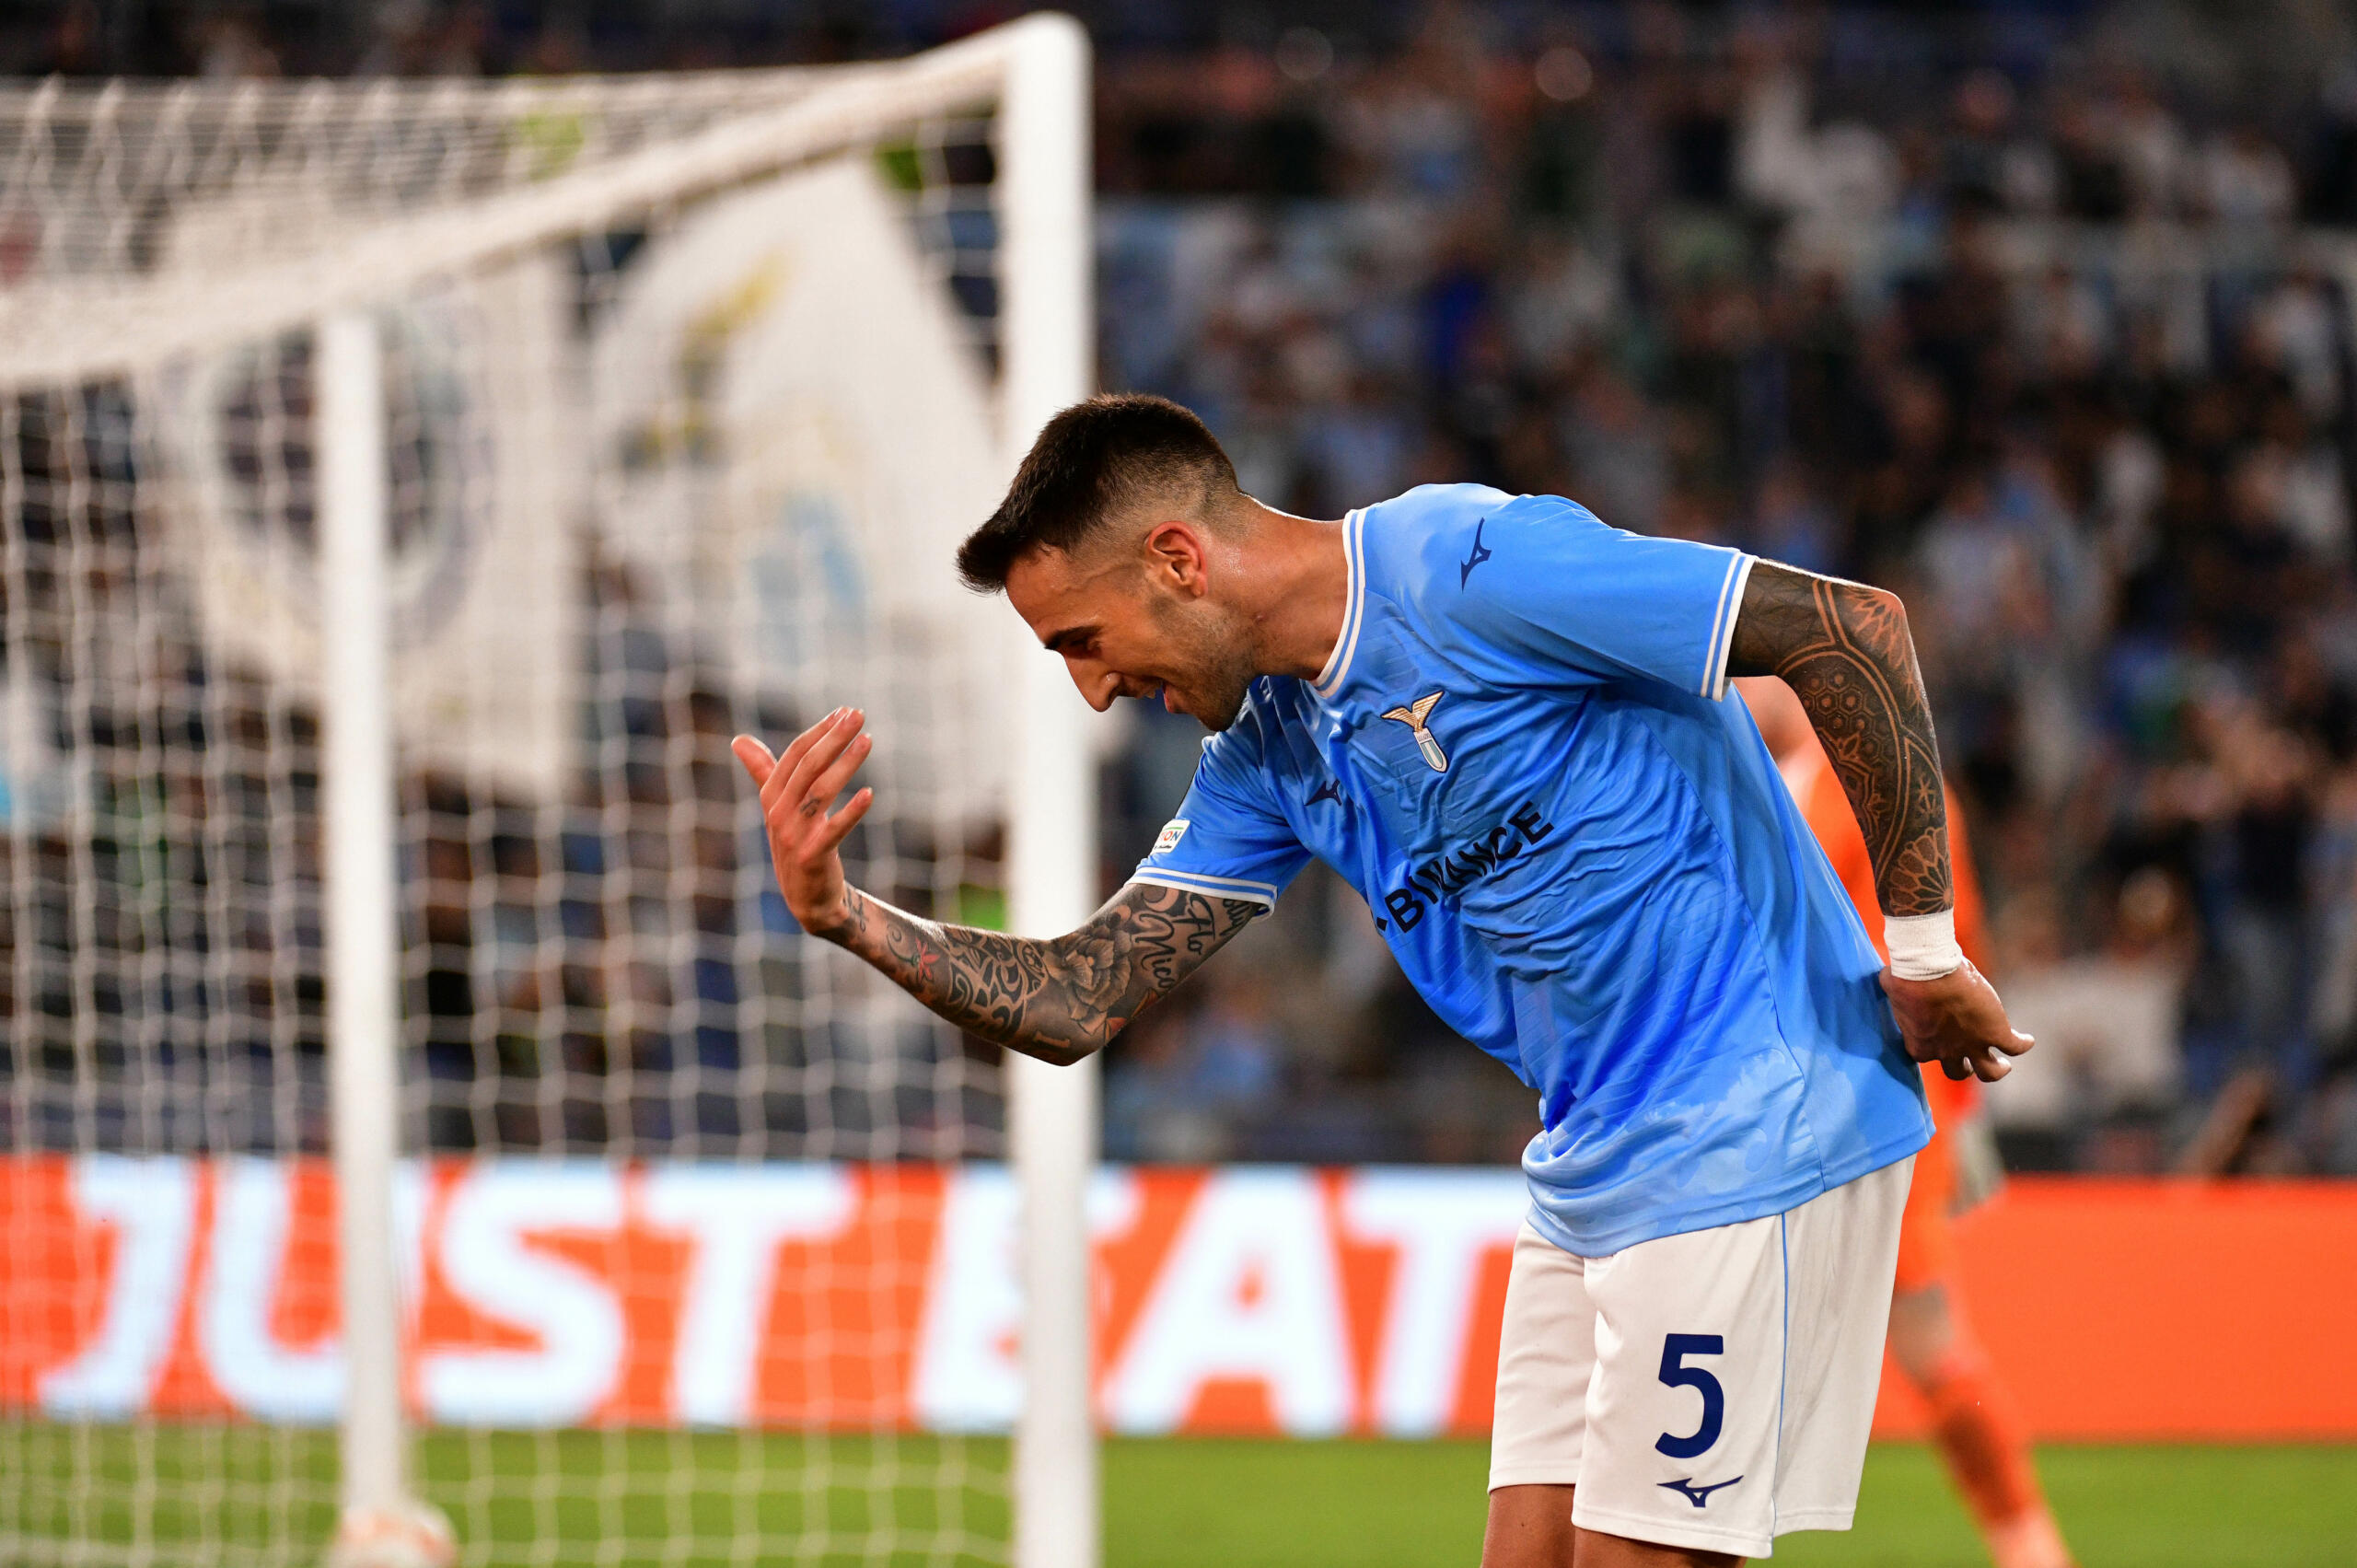 Juventus want to add some experience to their squad, and, on top of Giacomo Bonaventura, they have some interest in Matias Vecino.